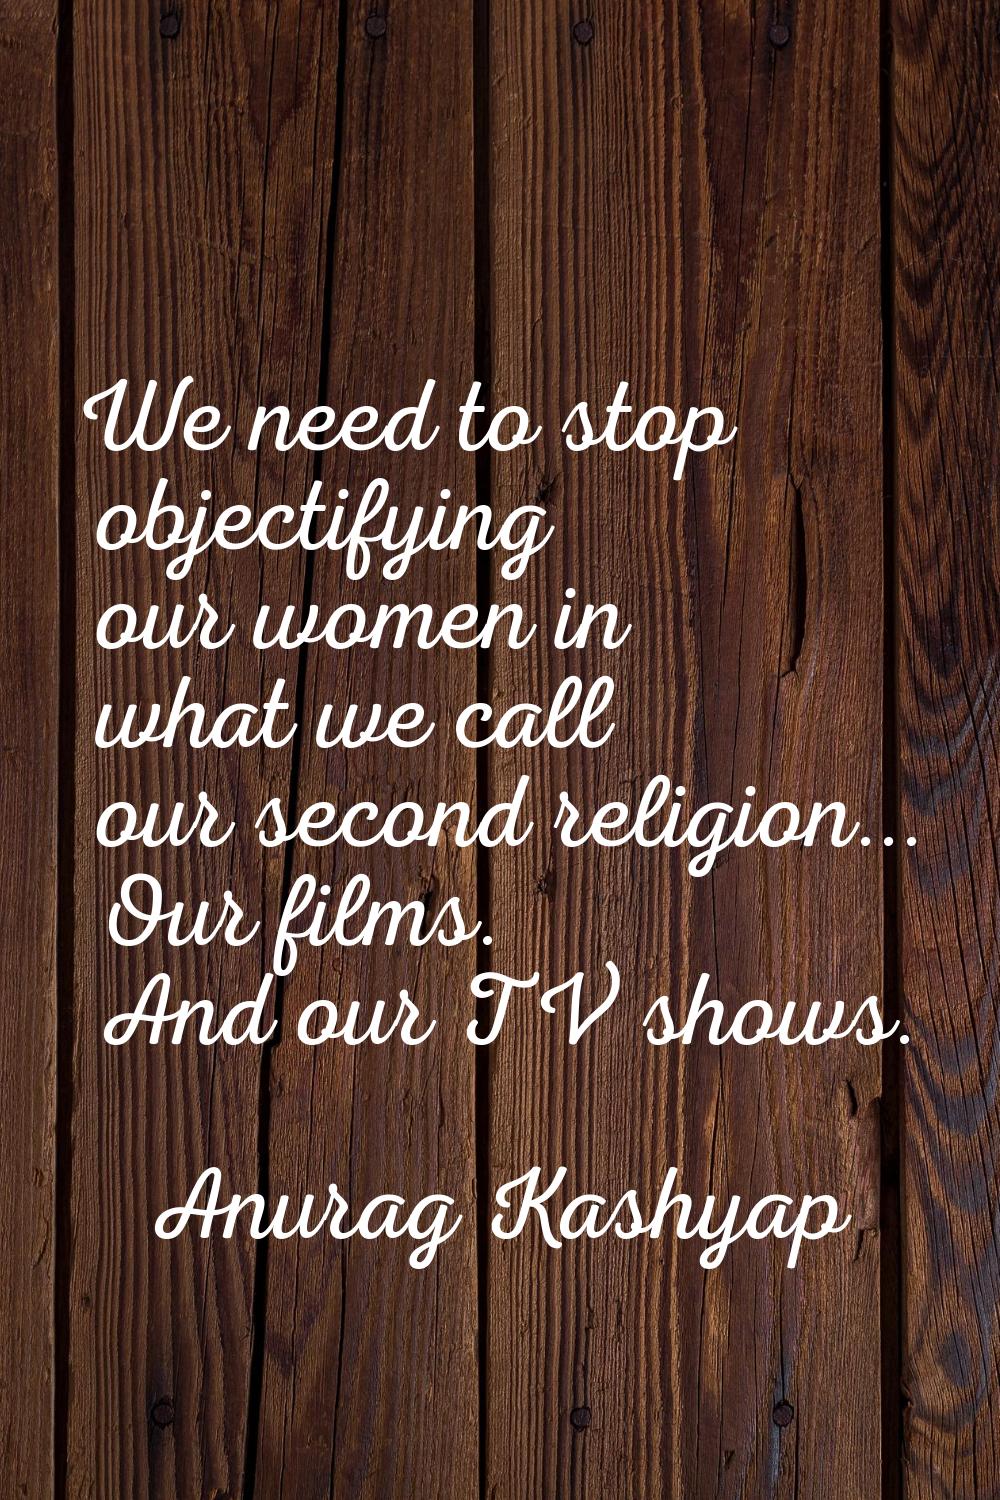 We need to stop objectifying our women in what we call our second religion... Our films. And our TV